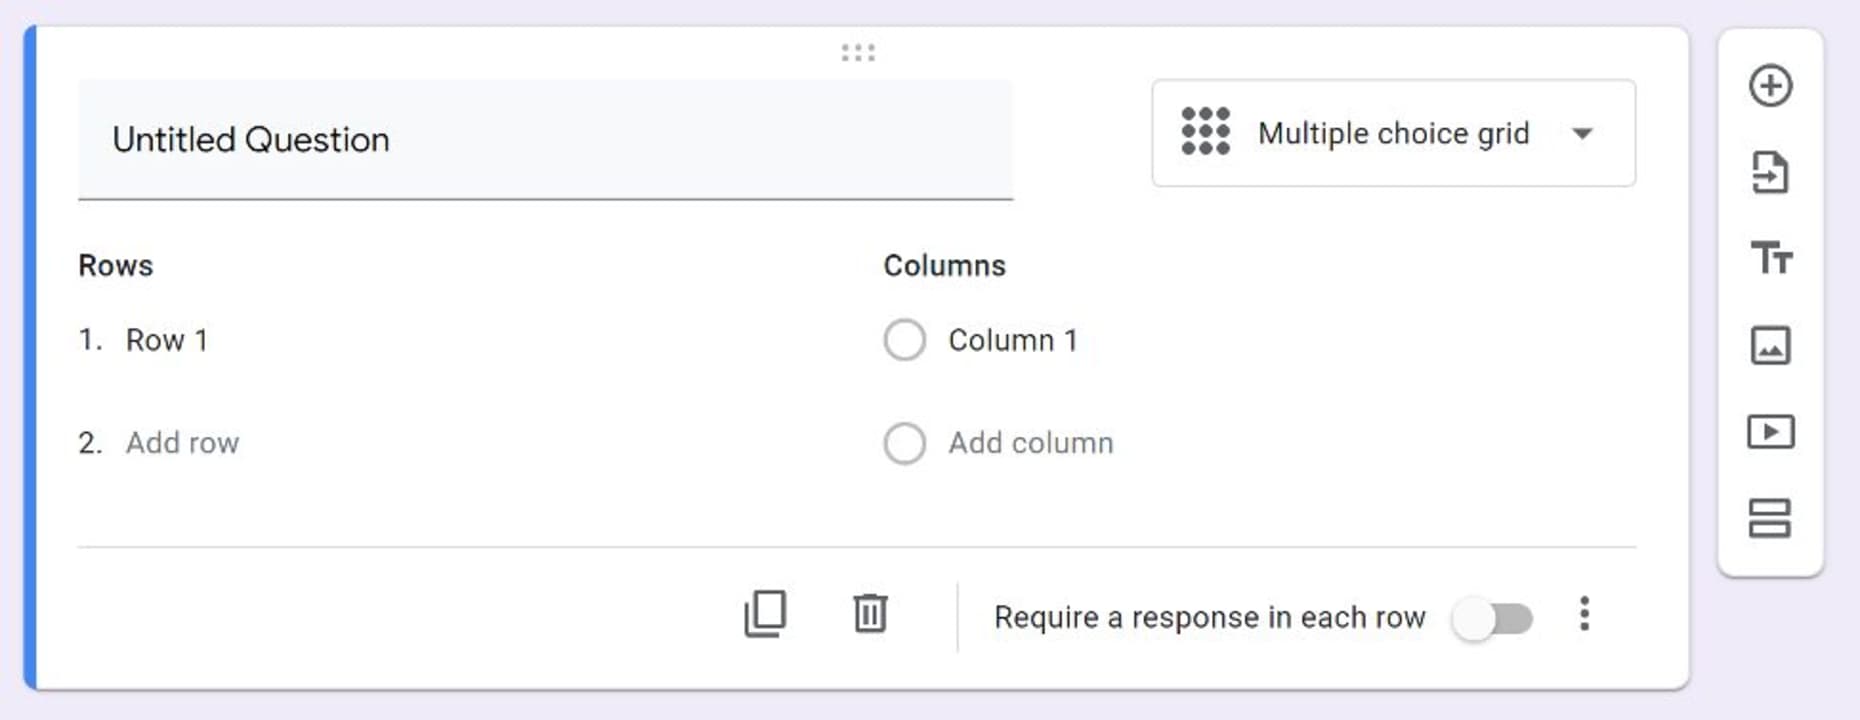 How to Take Attendance in Google Classroom